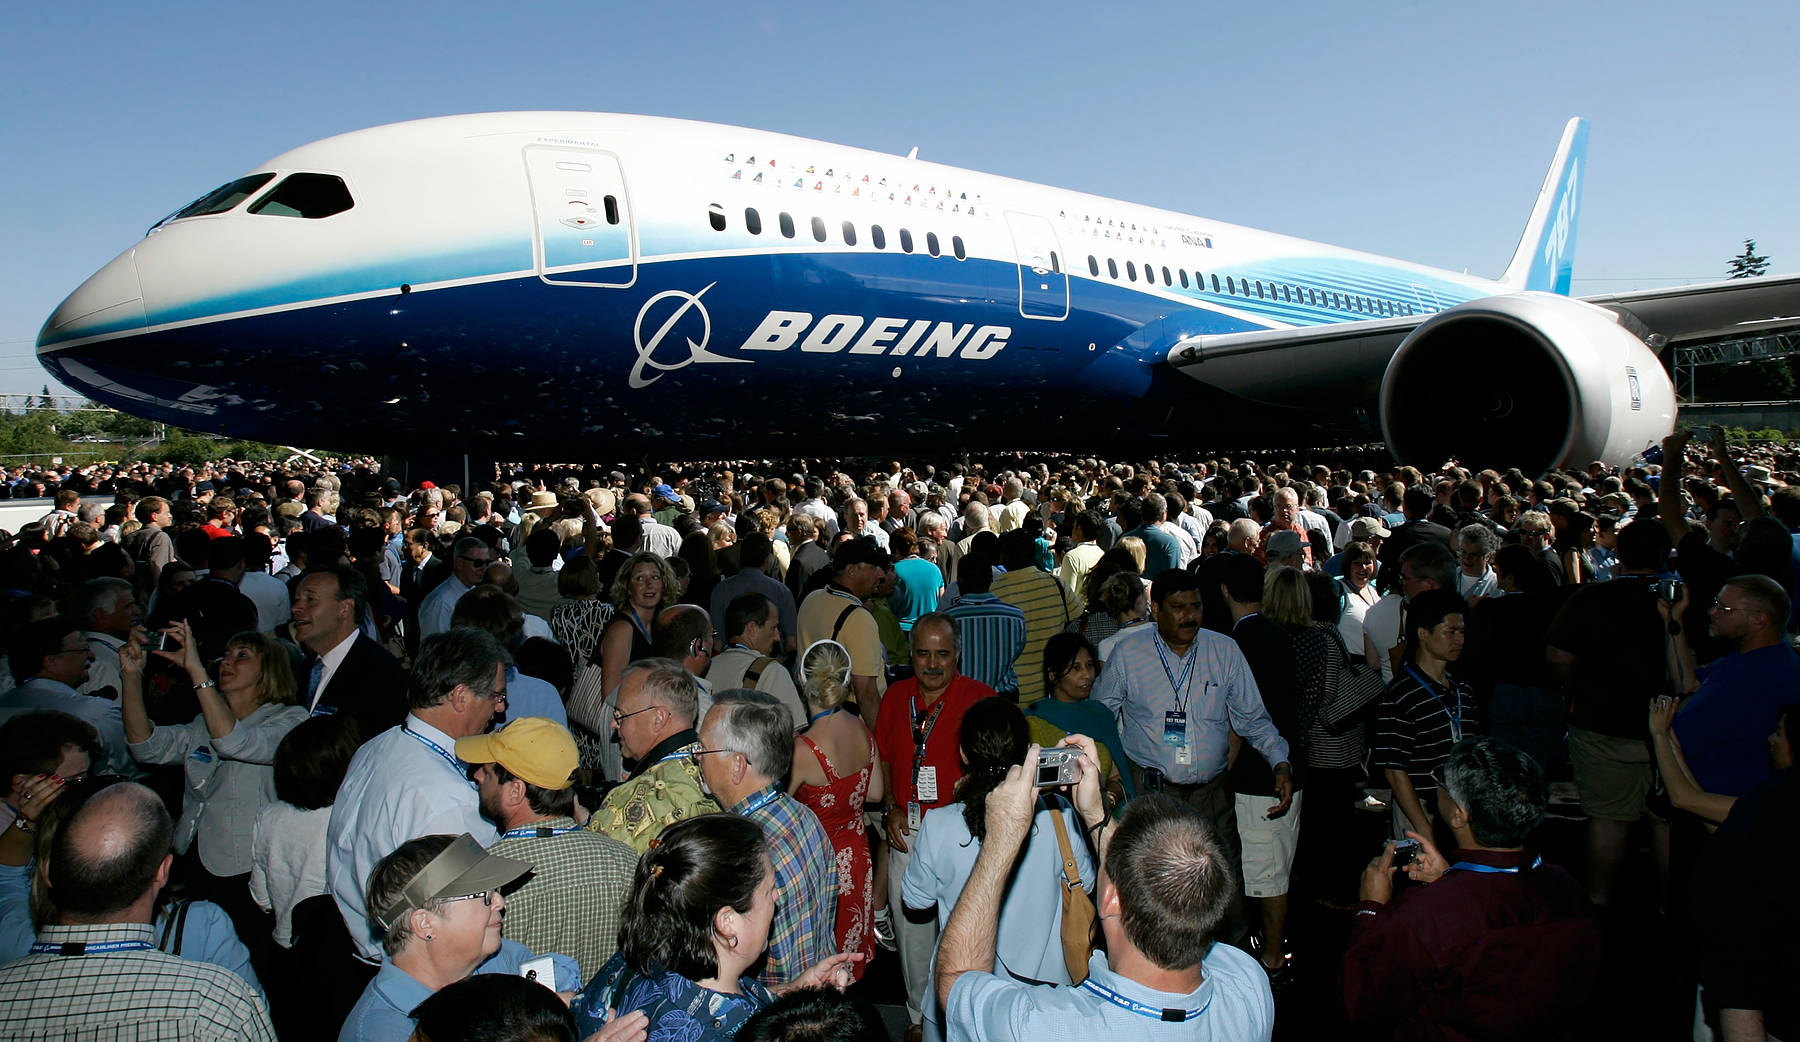 The first production model of the new Boeing 787 Dreamliner airplane is unveiled to an audience of several thousand employees, airline executives, and dignitaries during a ceremony July 8, 2007, at Boeing’s assembly plant in Everett. (AP Photo/Ted S. Warren, file)